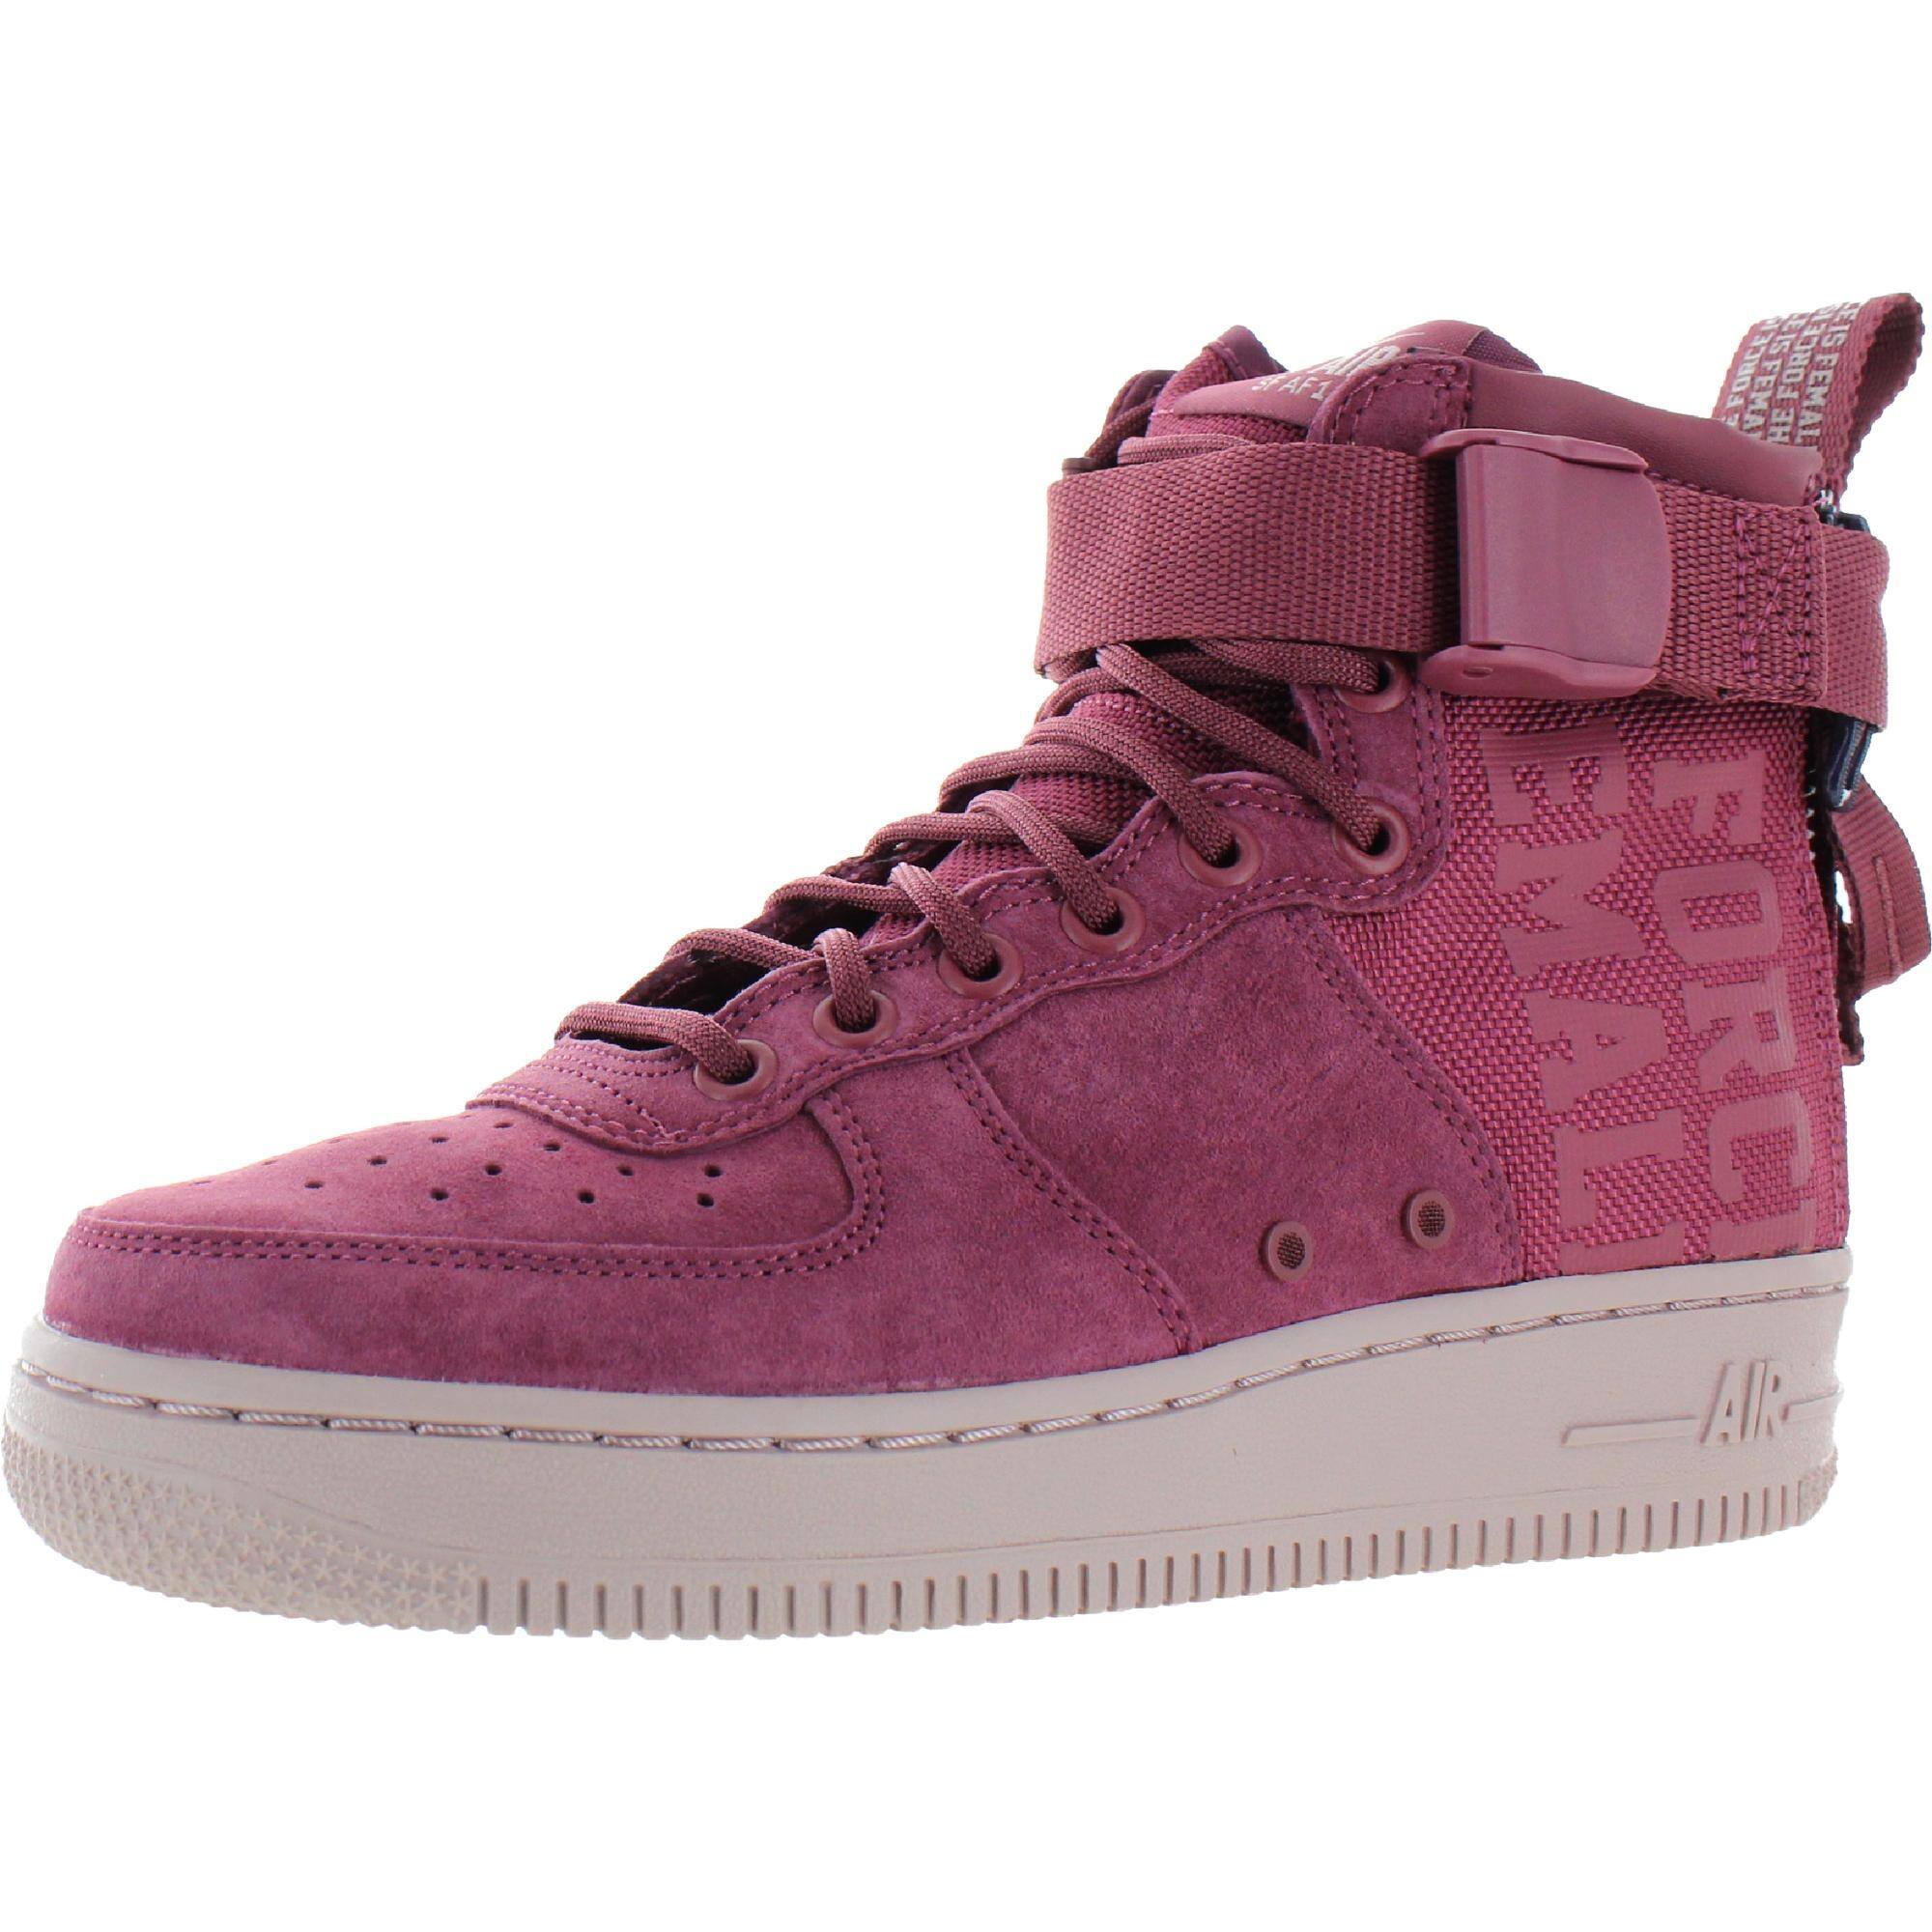 air force 1 the force is female